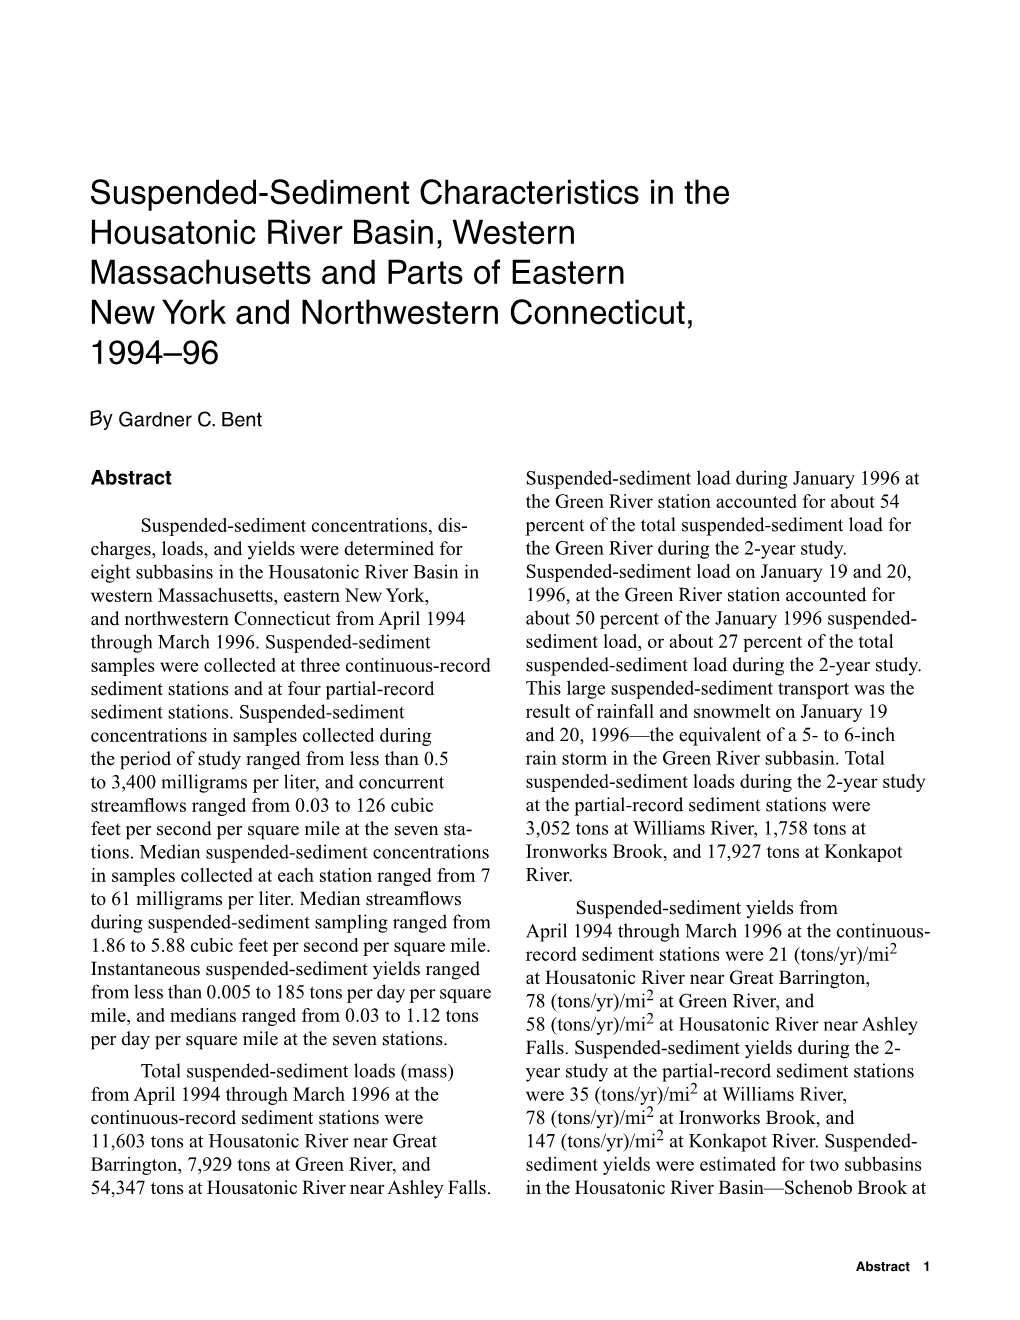 Suspended-Sediment Characteristics in the Housatonic River Basin, Western Massachusetts and Parts of Eastern New York and Northwestern Connecticut, 1994–96